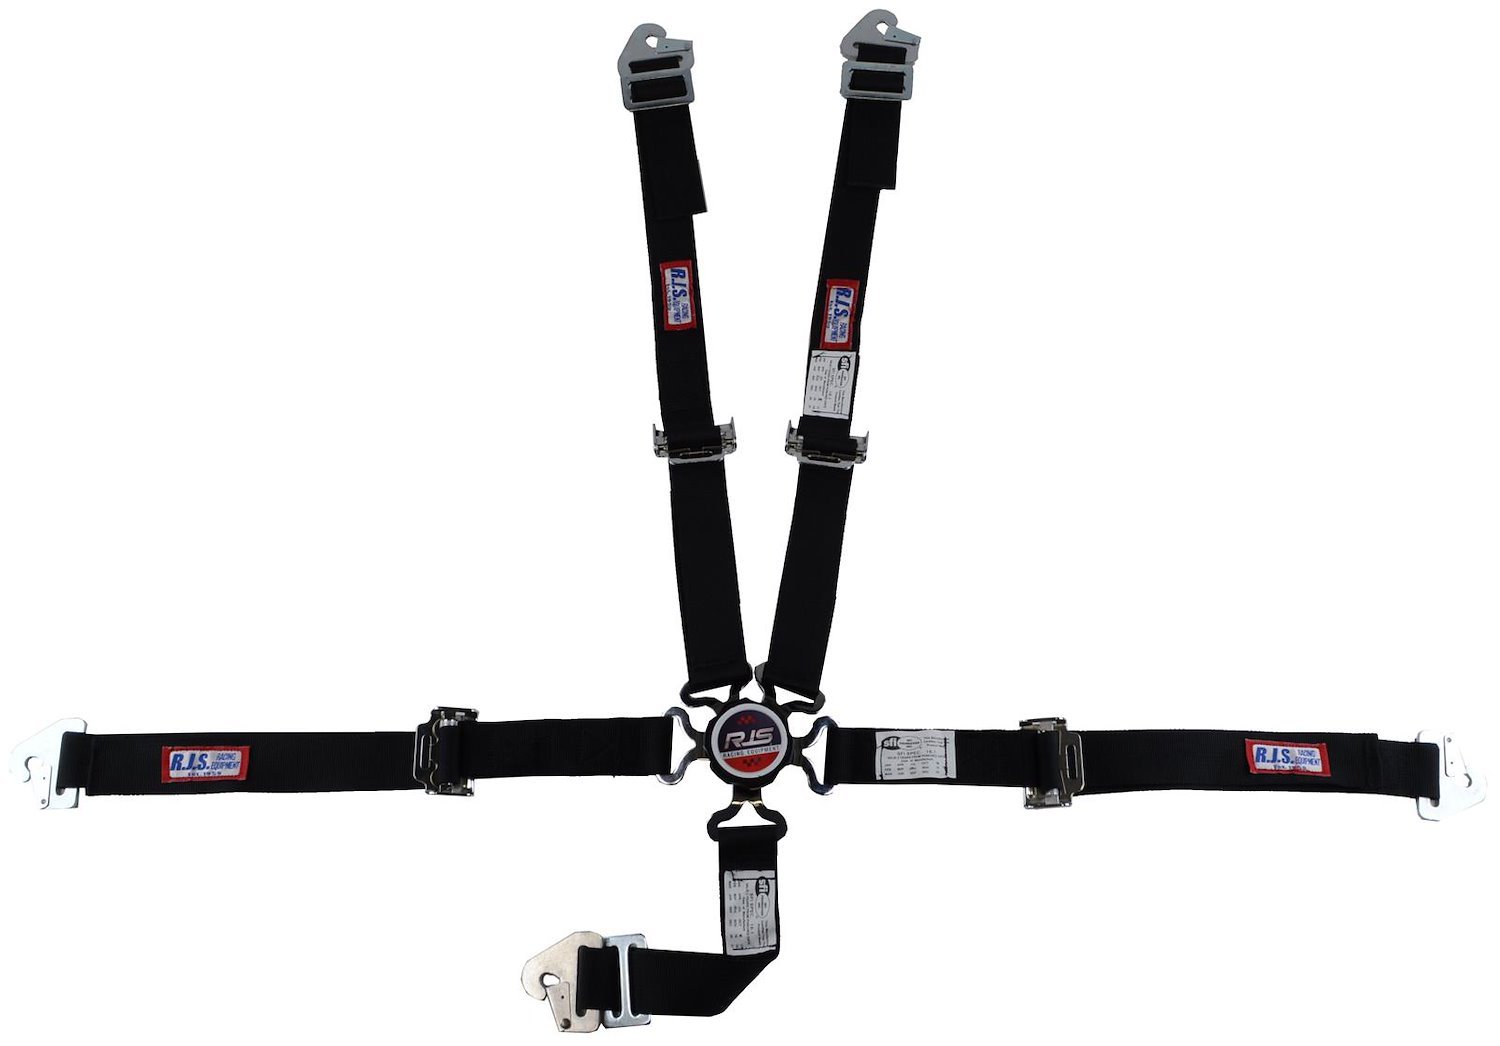 SFI 16.1 CAM-LOCK HARNESS 2 PULL DOWN Lap Belt 2 Shoulder Harness Individual ROLL BAR Mount 2 DOUBLE Sub ALL WRAP ENDS BLUE